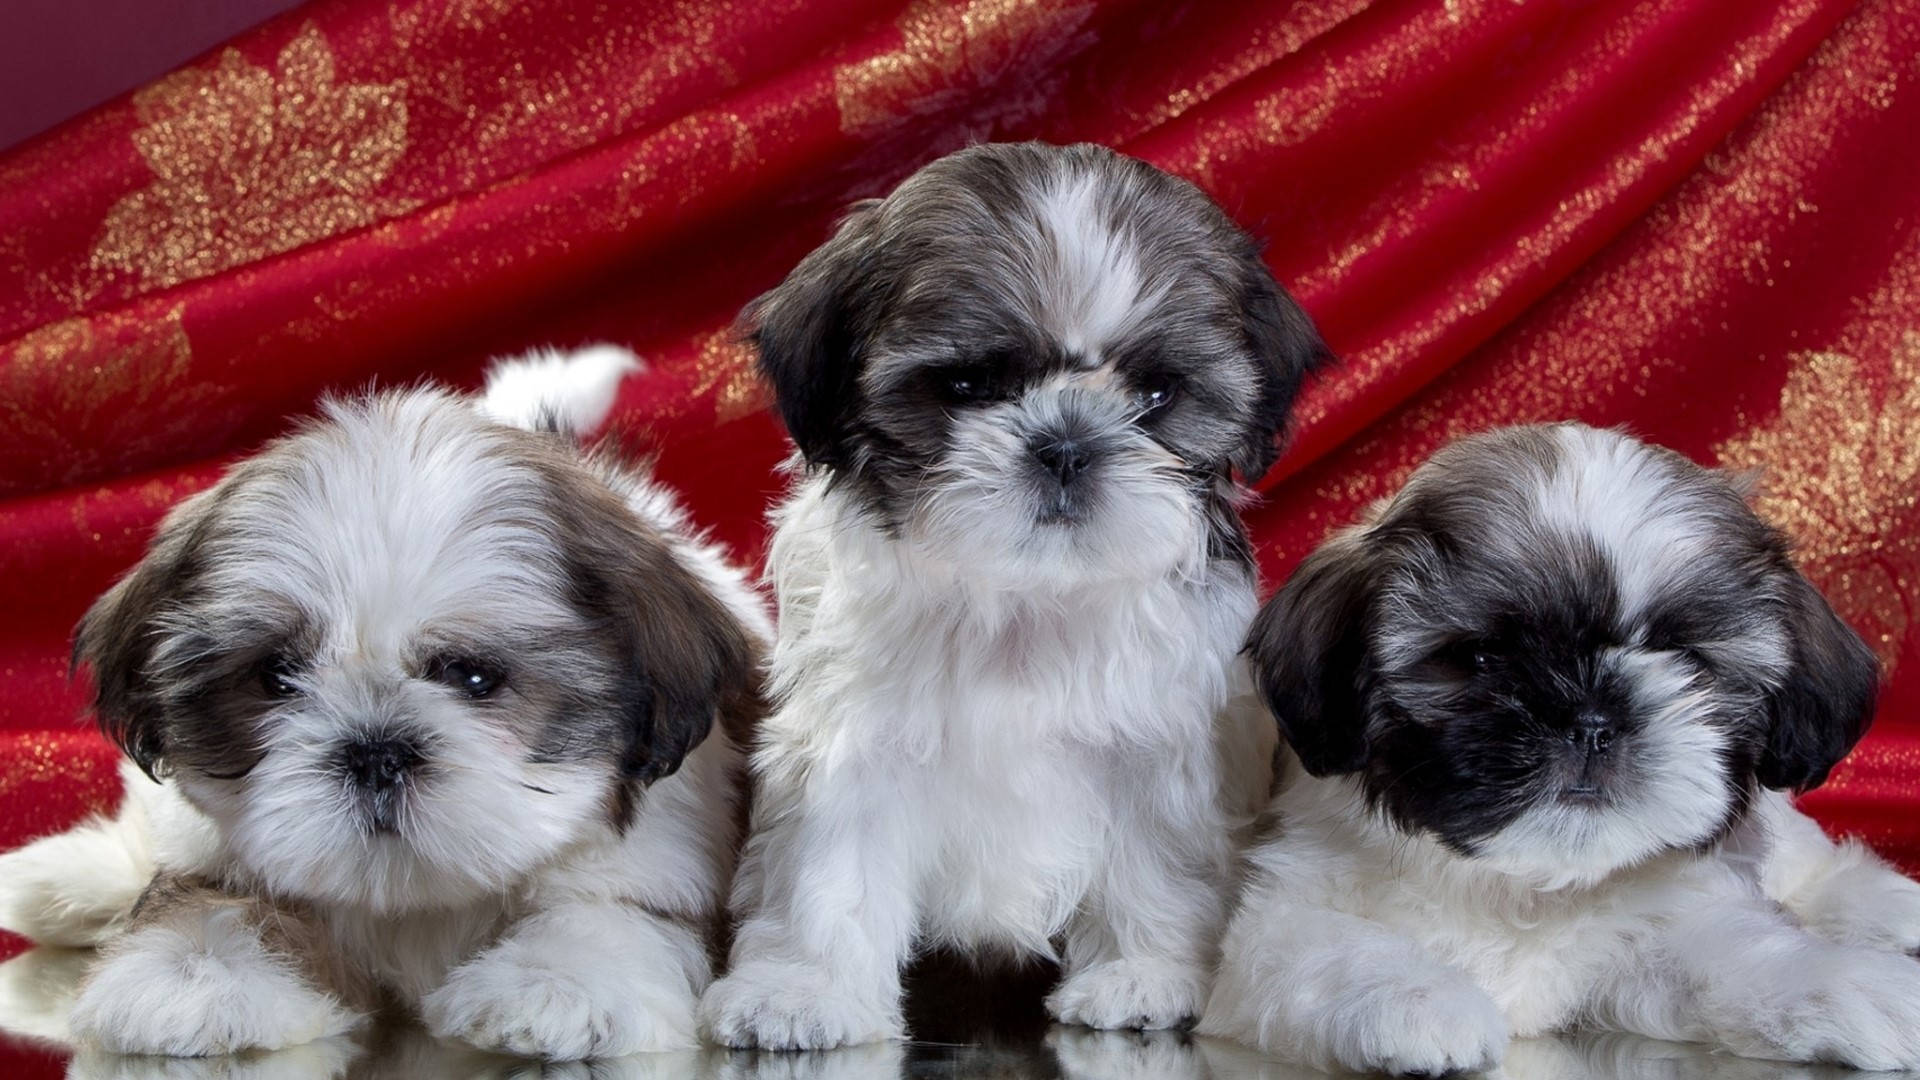 Three Puppy Dogs With Red Cloth Wallpaper